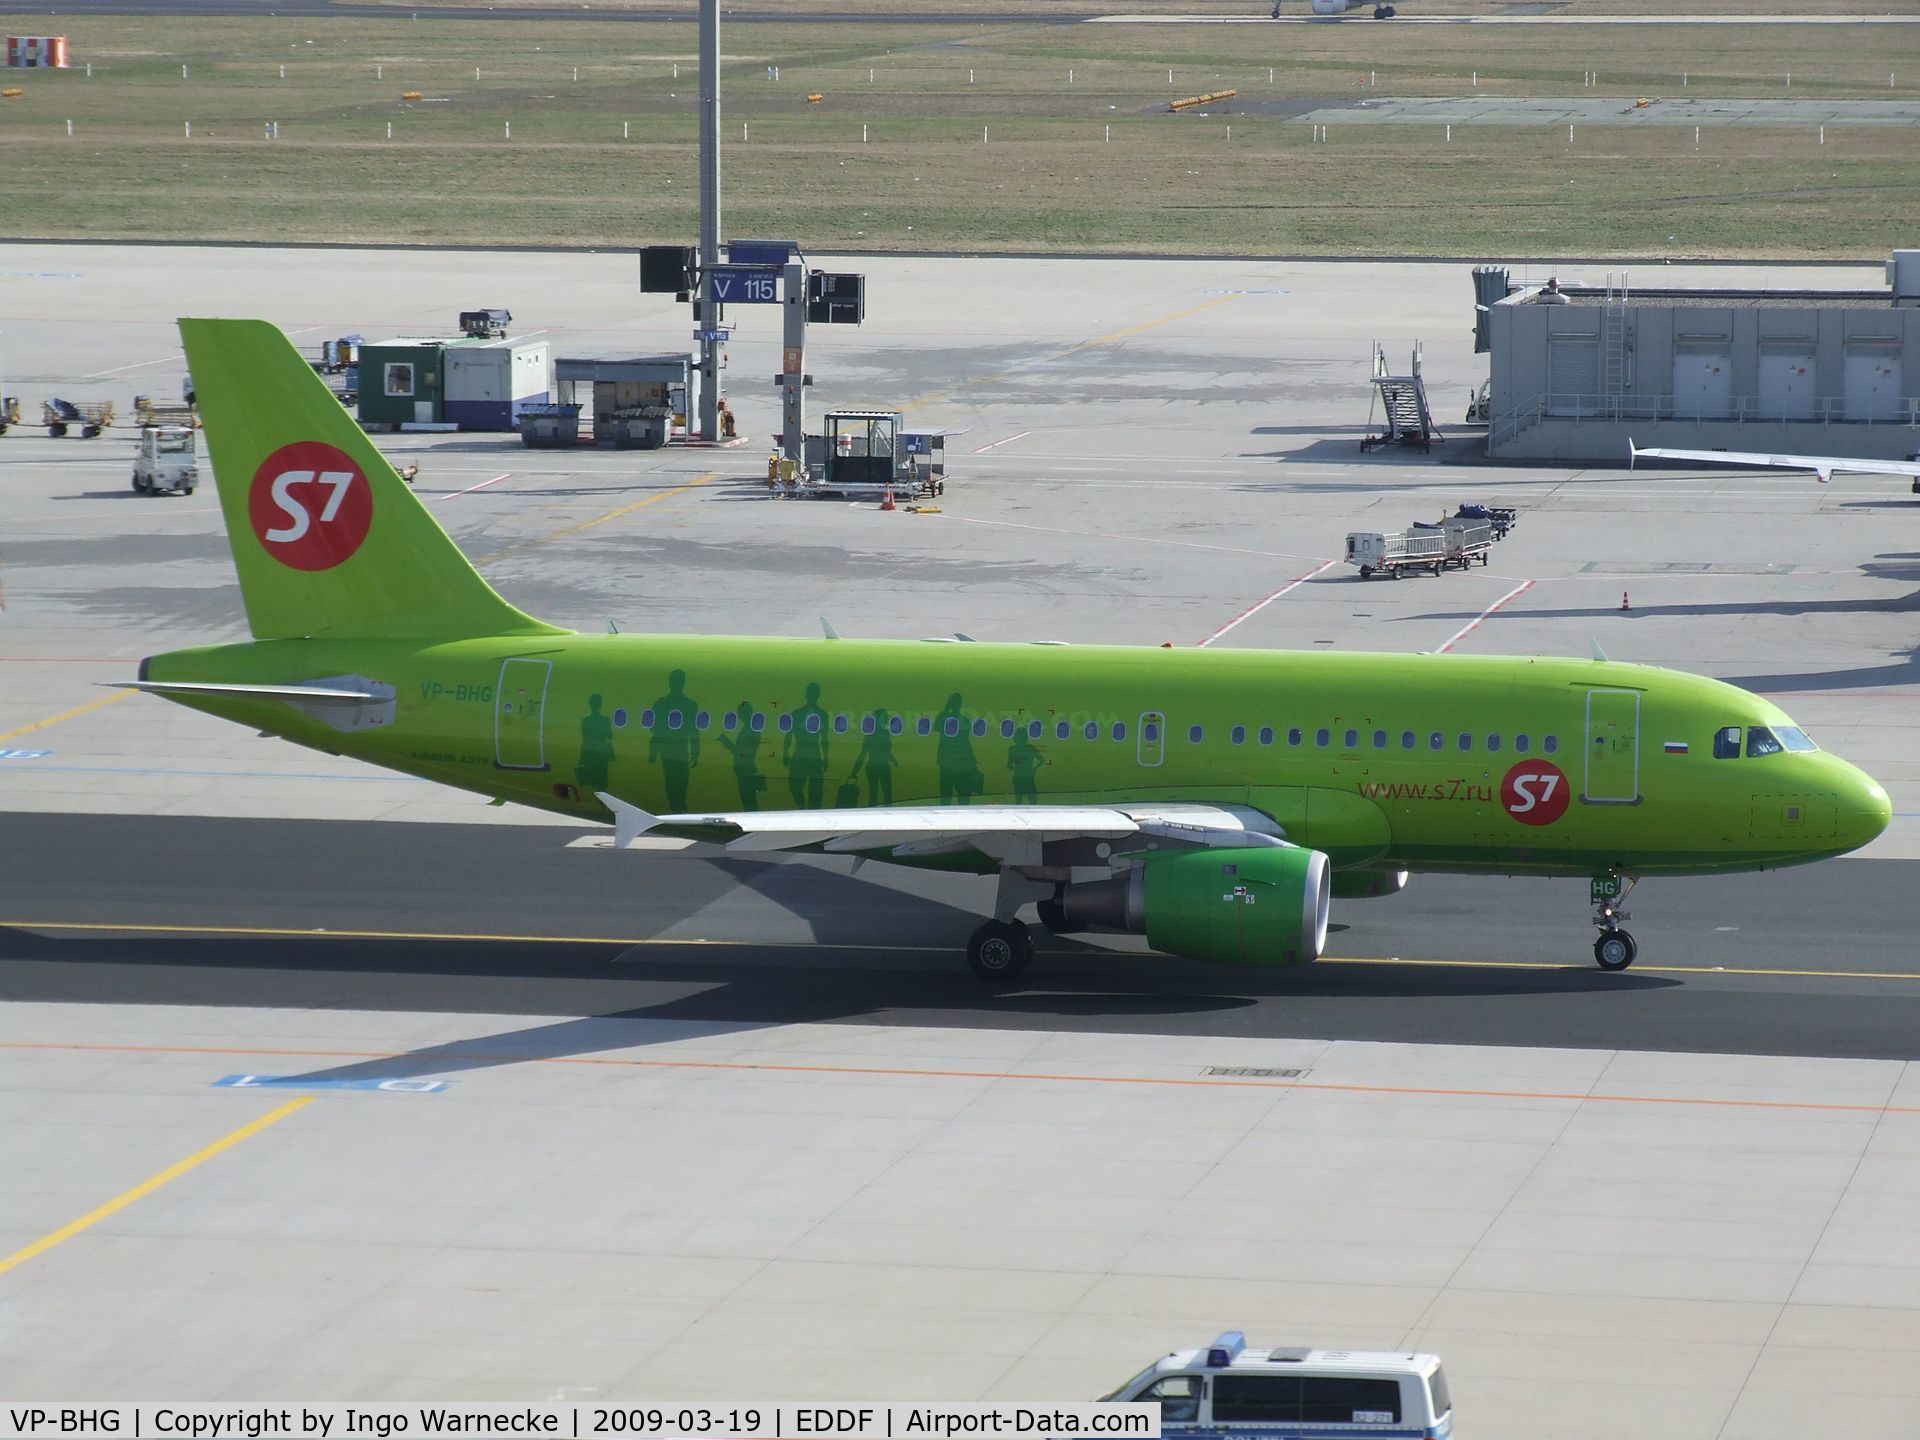 VP-BHG, 2002 Airbus A319-114 C/N 1870, Airbus A319-114 of S7 Siberia Airlines in front of terminal 2